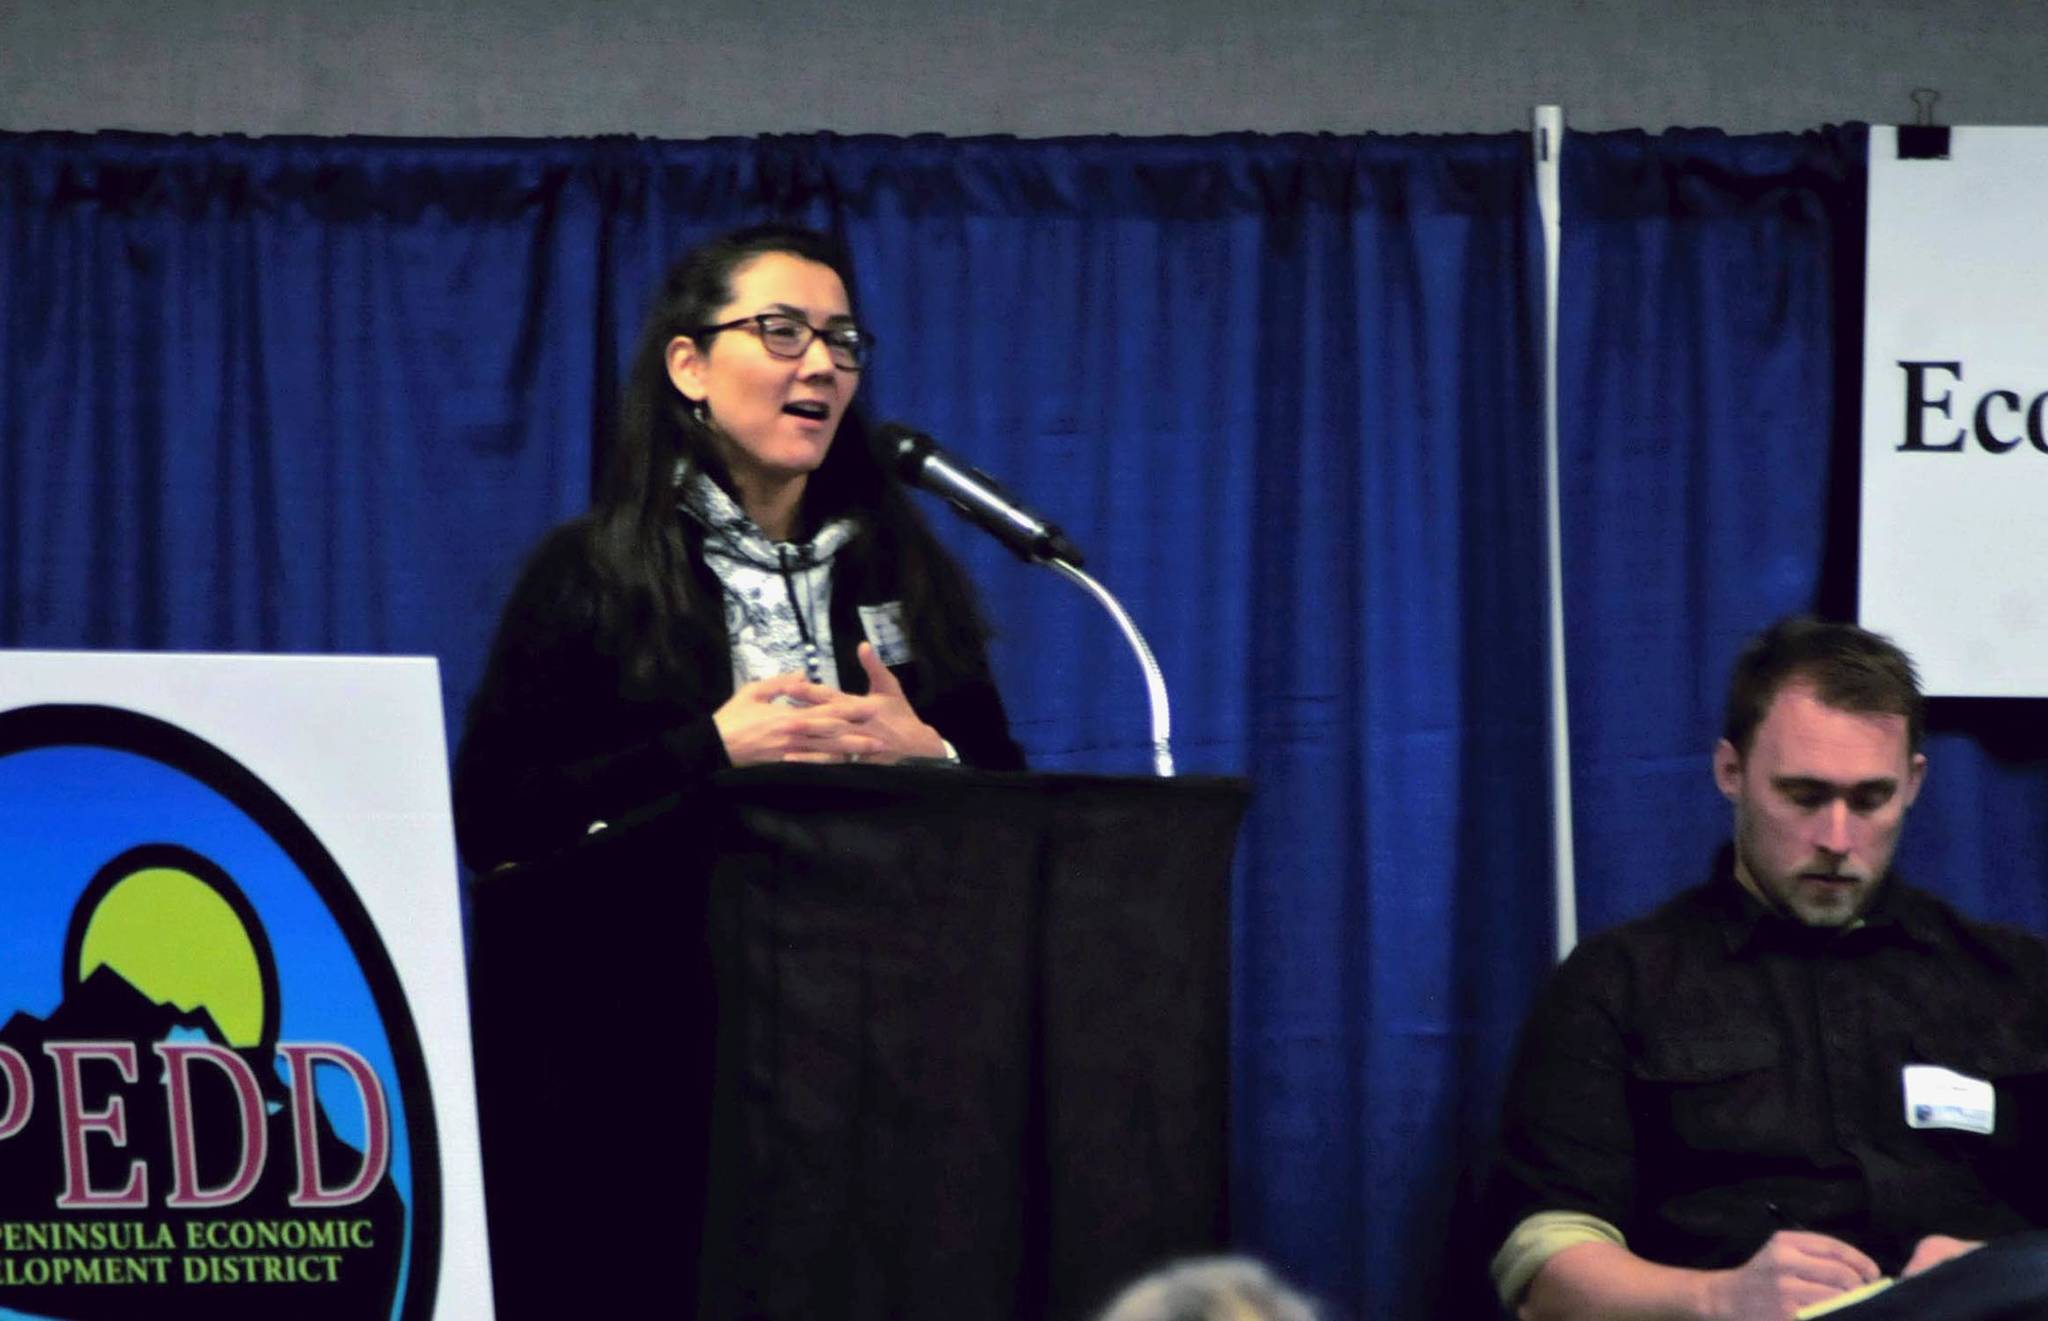 Mary Sattler Peltola, one of the Alaska Humanities Forum’s inaugural group of Alaska Salmon Fellows, speaks to the attendees at the Kenai Peninsula Economic Development District’s Industry Outlook Forum on Wednesday, Jan. 10, 2018 in Soldotna, Alaska. (Photo by Elizabeth Earl/Peninsula Clarion)